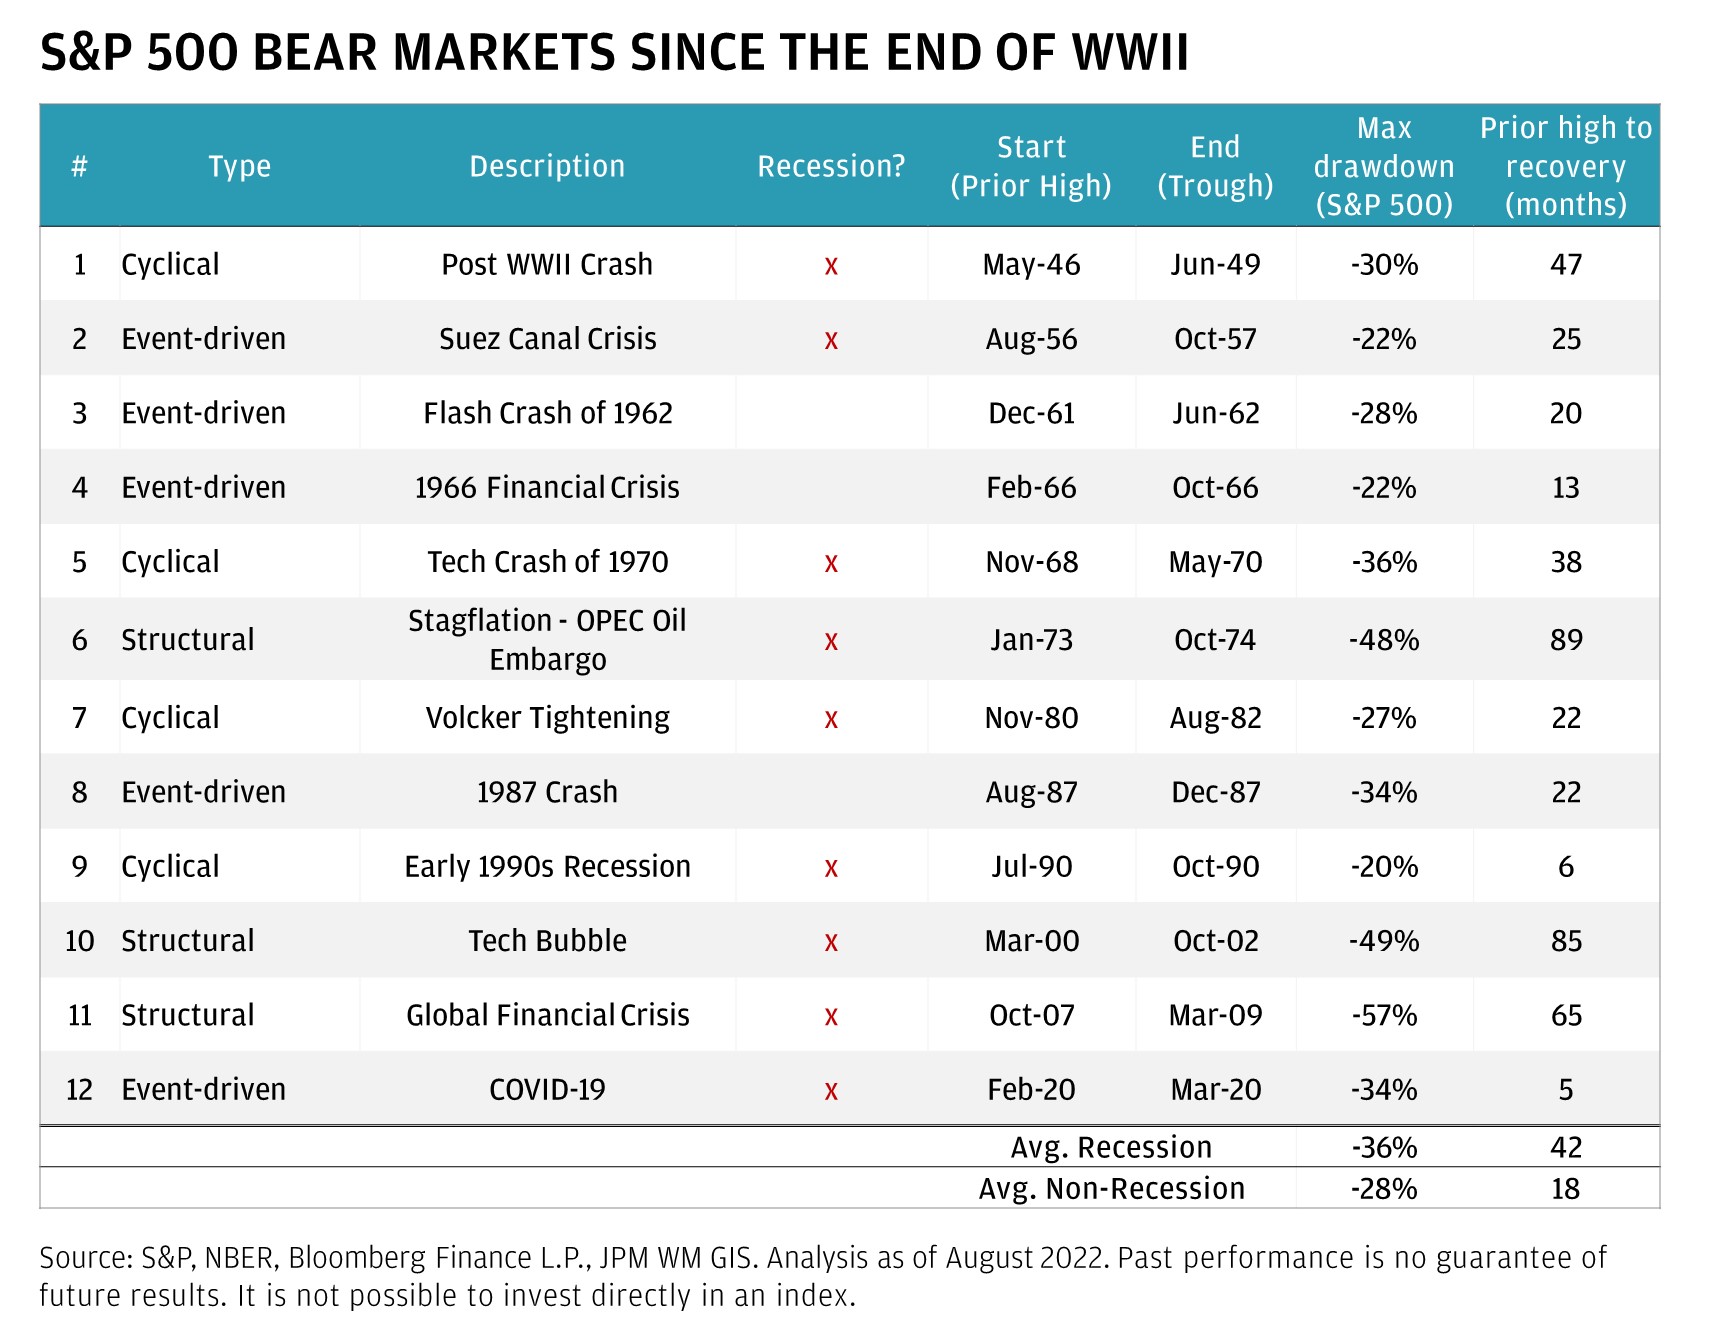 This table shows the S&P 500 bear markets since the end of WWII (and their type, description, recession/no recession, start, end, max drawdown % and prior high to recovery in months).